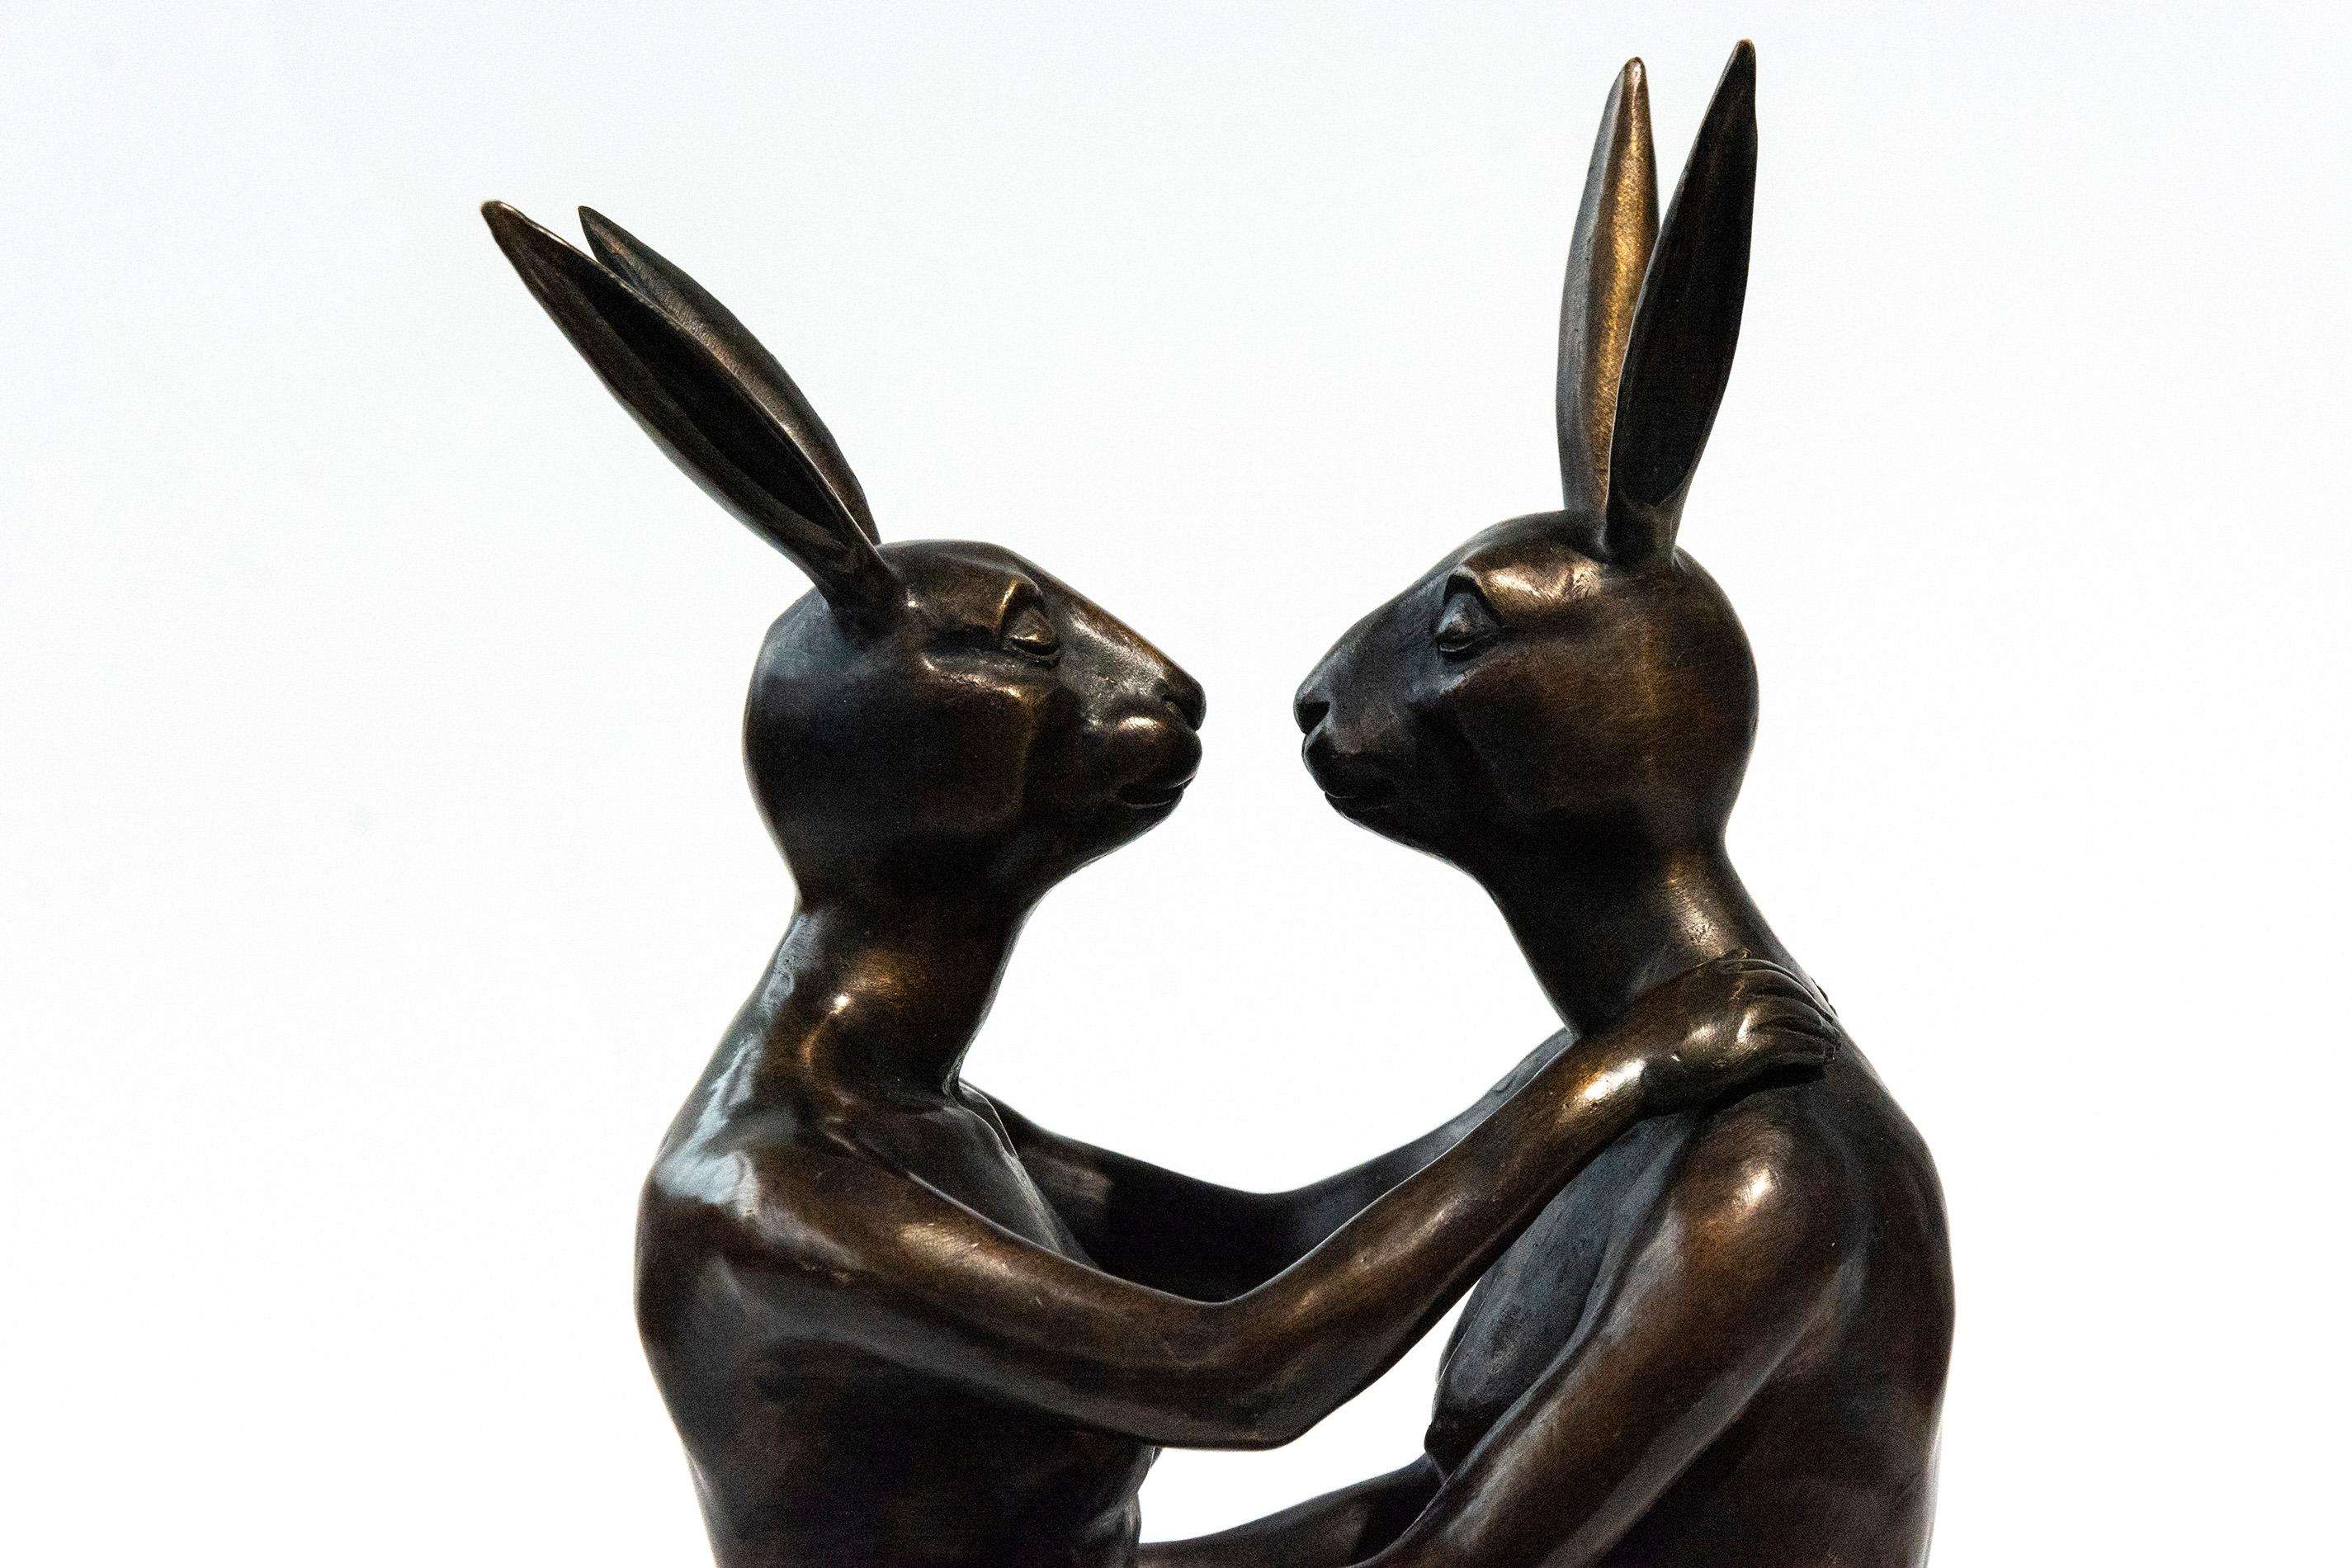 She loved being in love 7/30 - playful, figurative bronze sculpture - Sculpture by Gillie and Marc Schattner